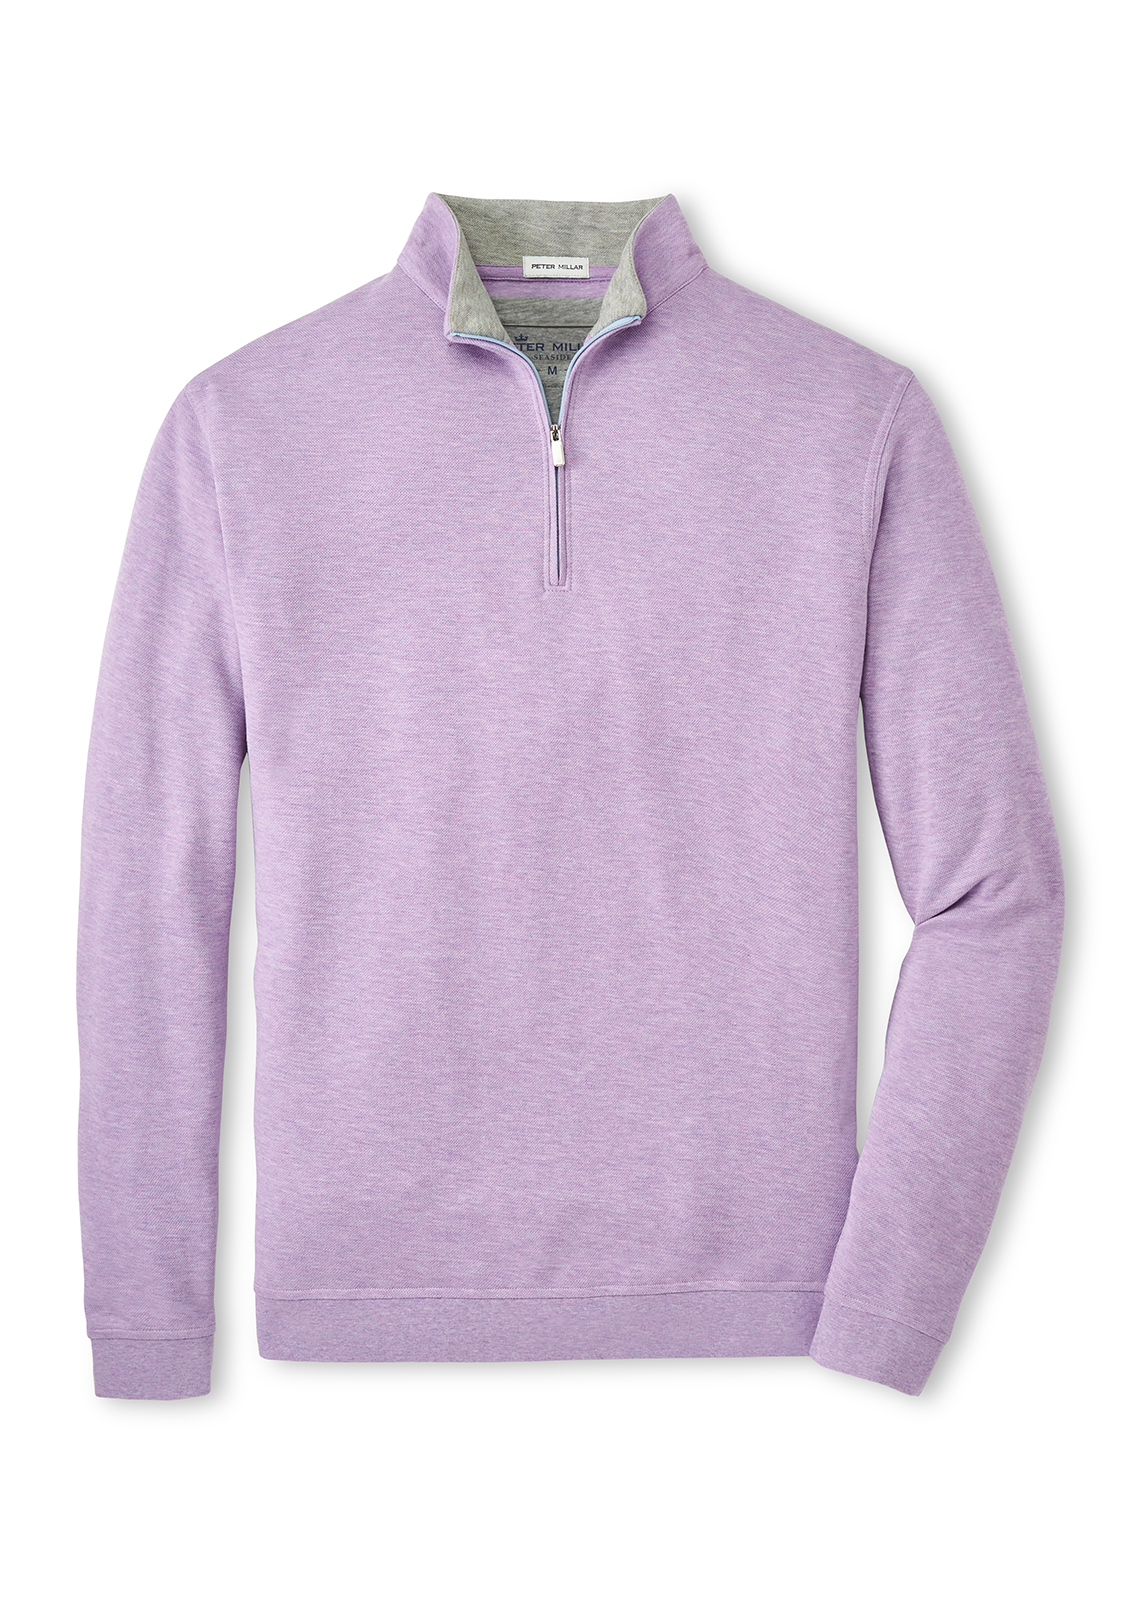 Shop CROWN COMFORT PULLOVER by PETER MILLAR (#MS23K49) on Pepi Sports